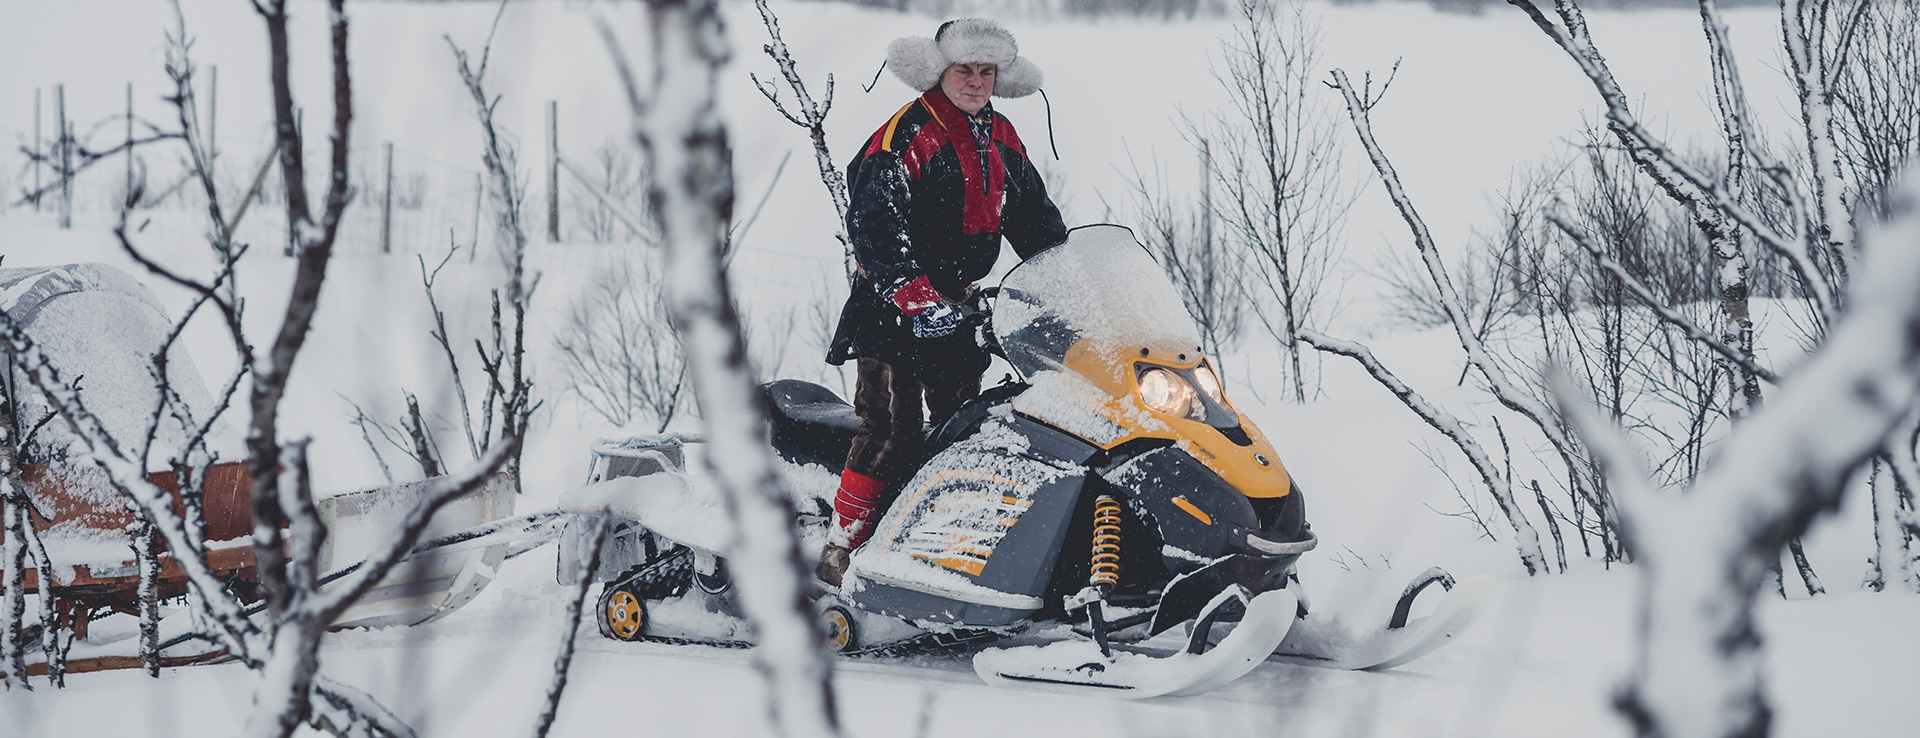 Man in Sami costume on a snowmobile